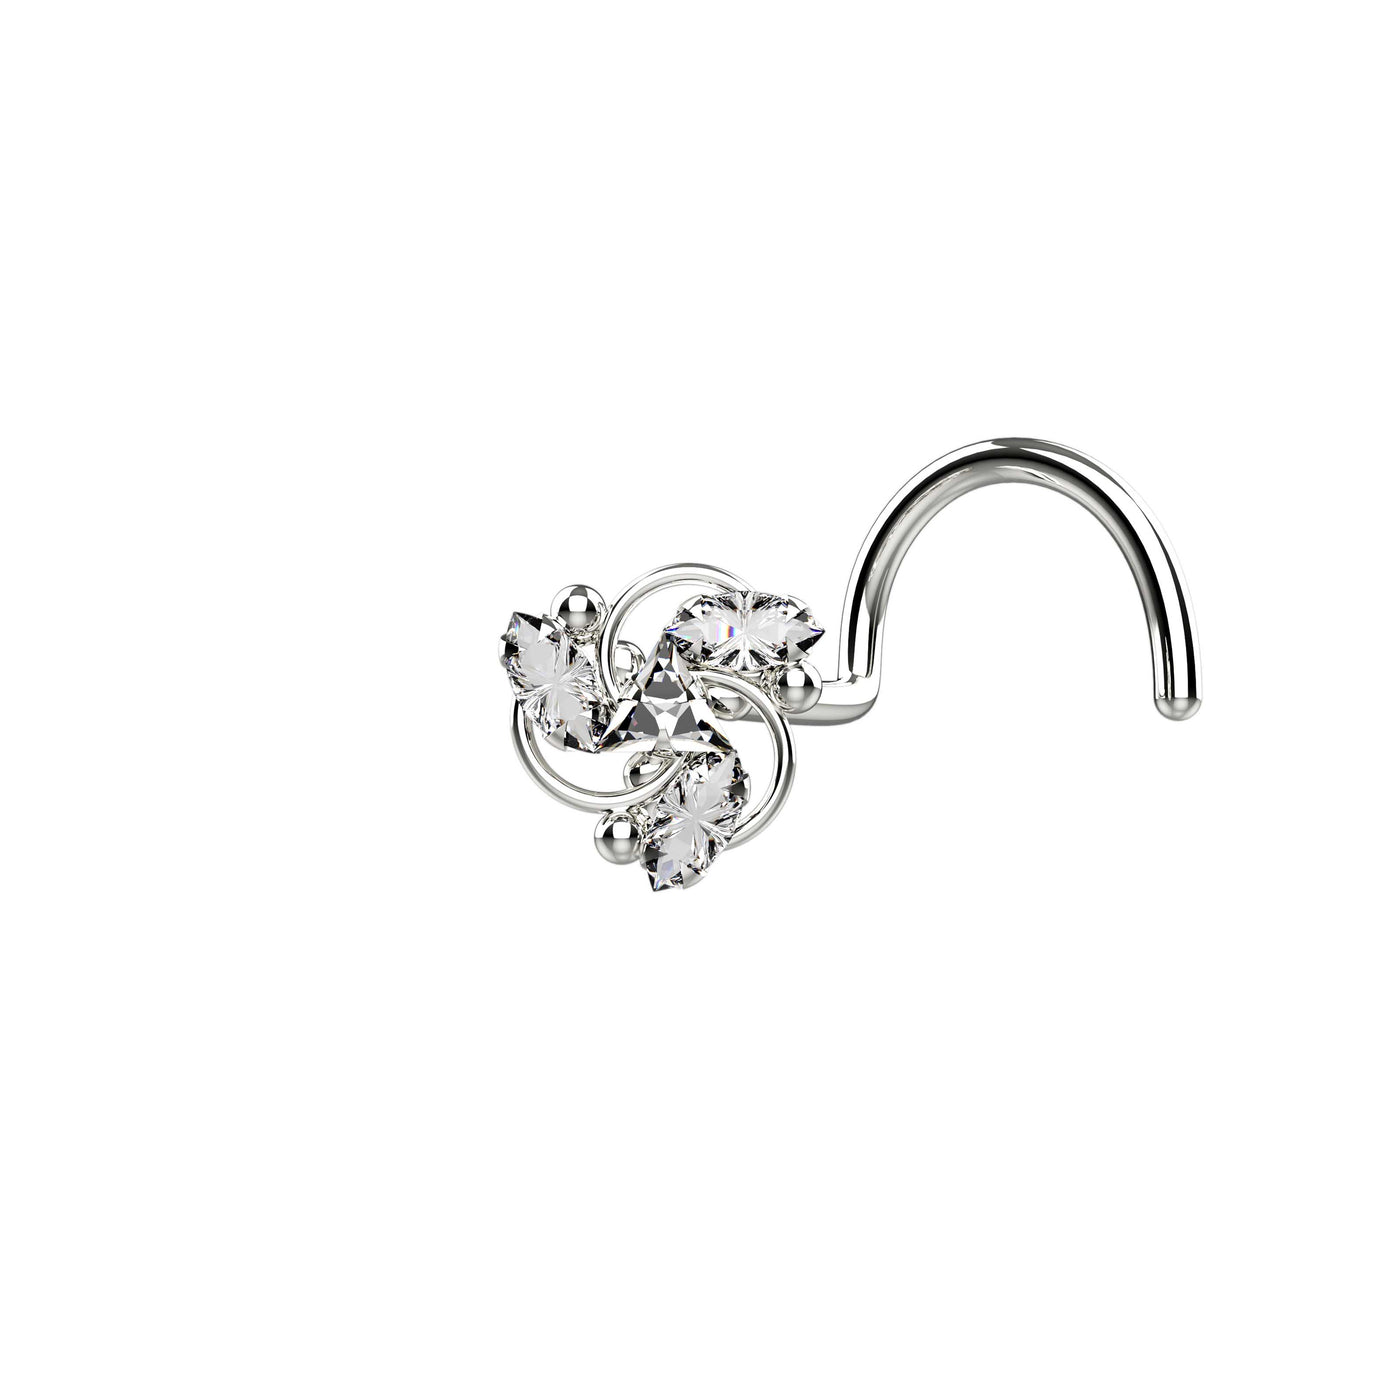 Statement silver nose ring studs